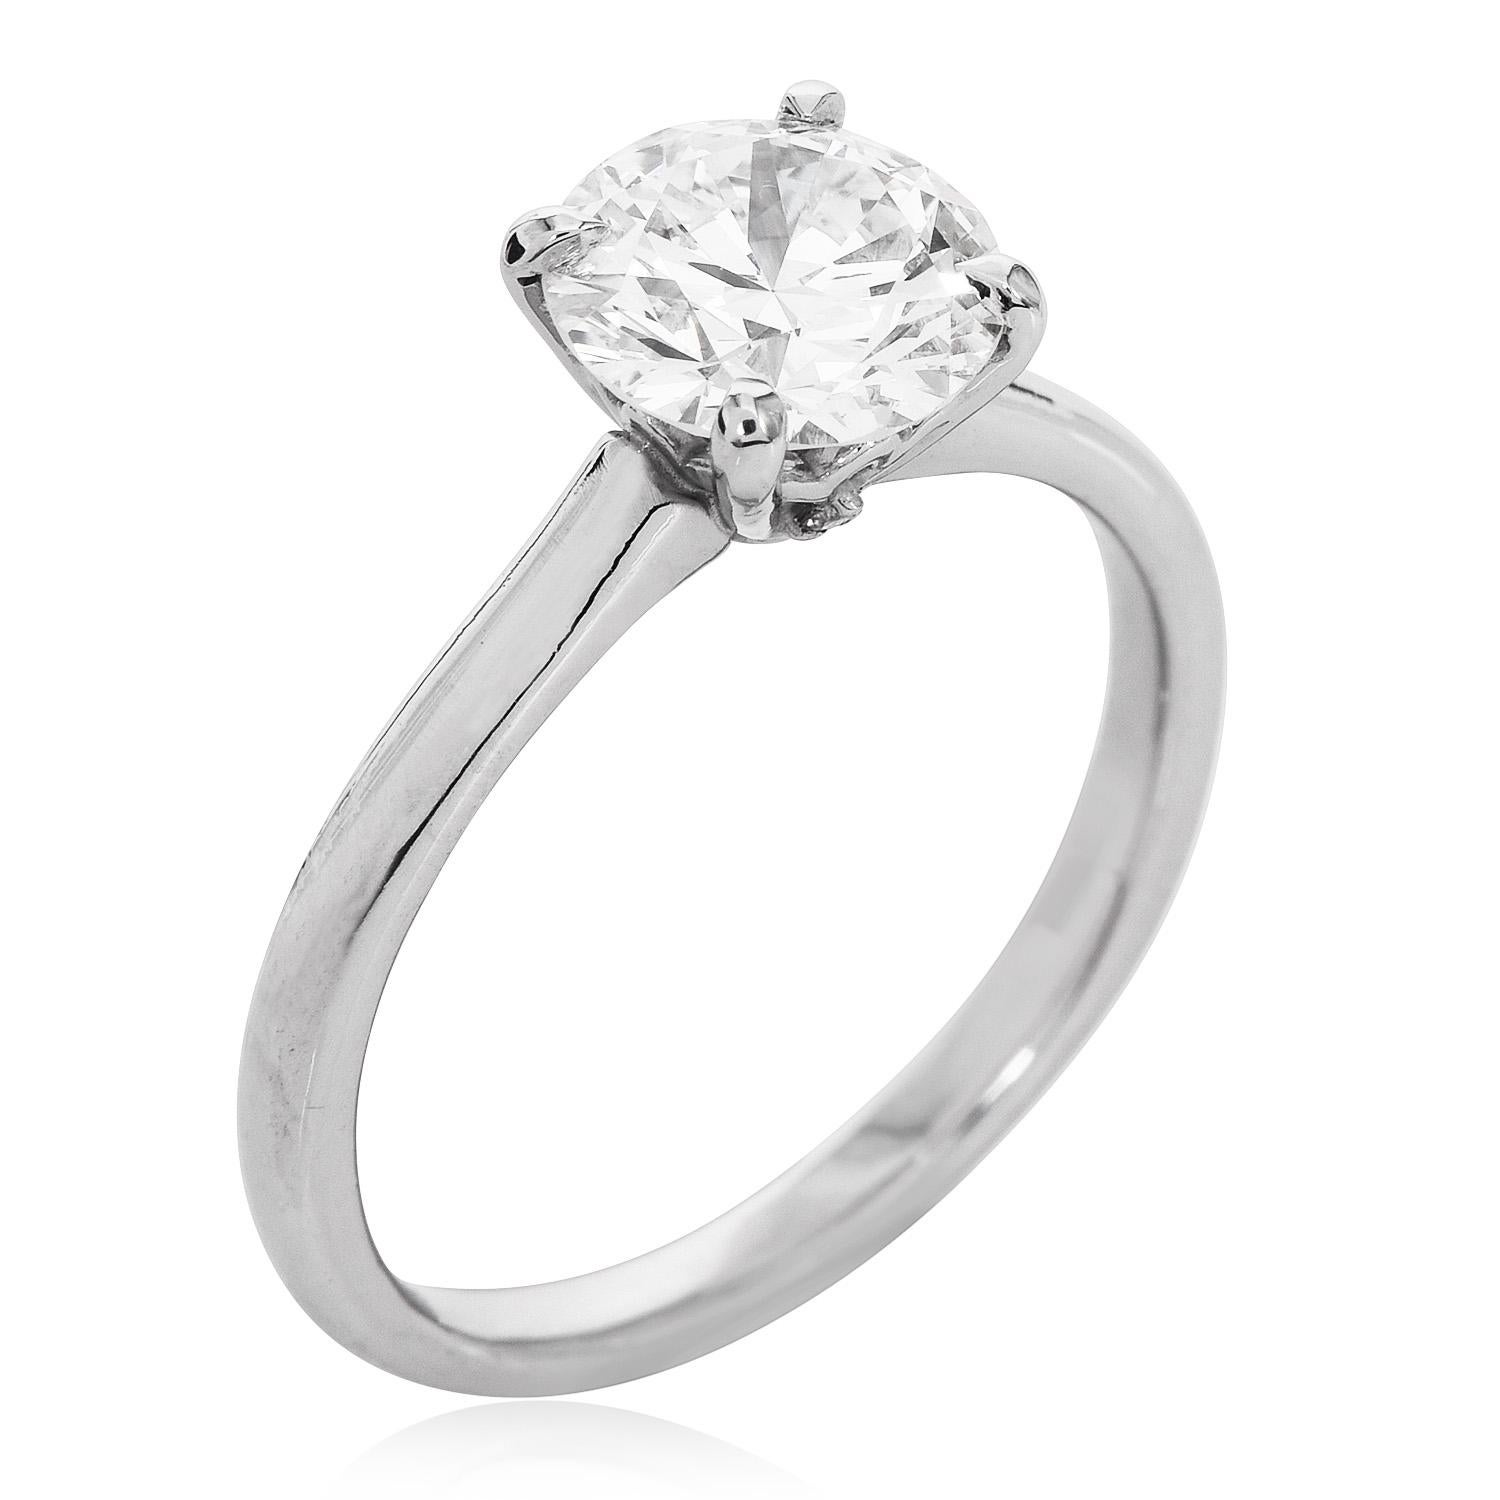 Dover GIA 1.56 Carat H VVS2 Round Cut White Gold Solitaire Wedding Ring In New Condition For Sale In Miami, FL